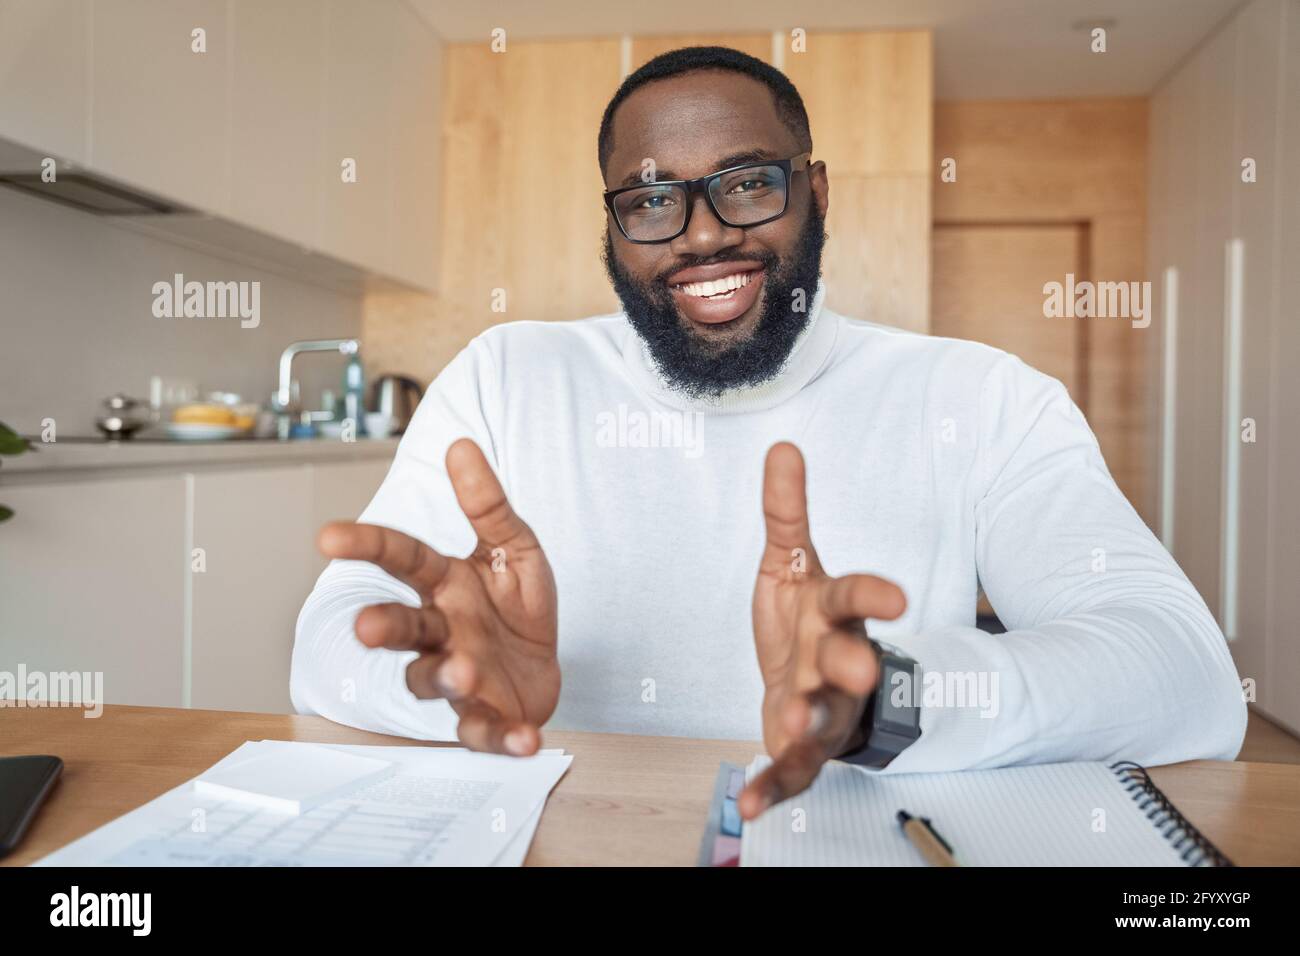 Portrait of talking young african amercian man having online video chat Stock Photo